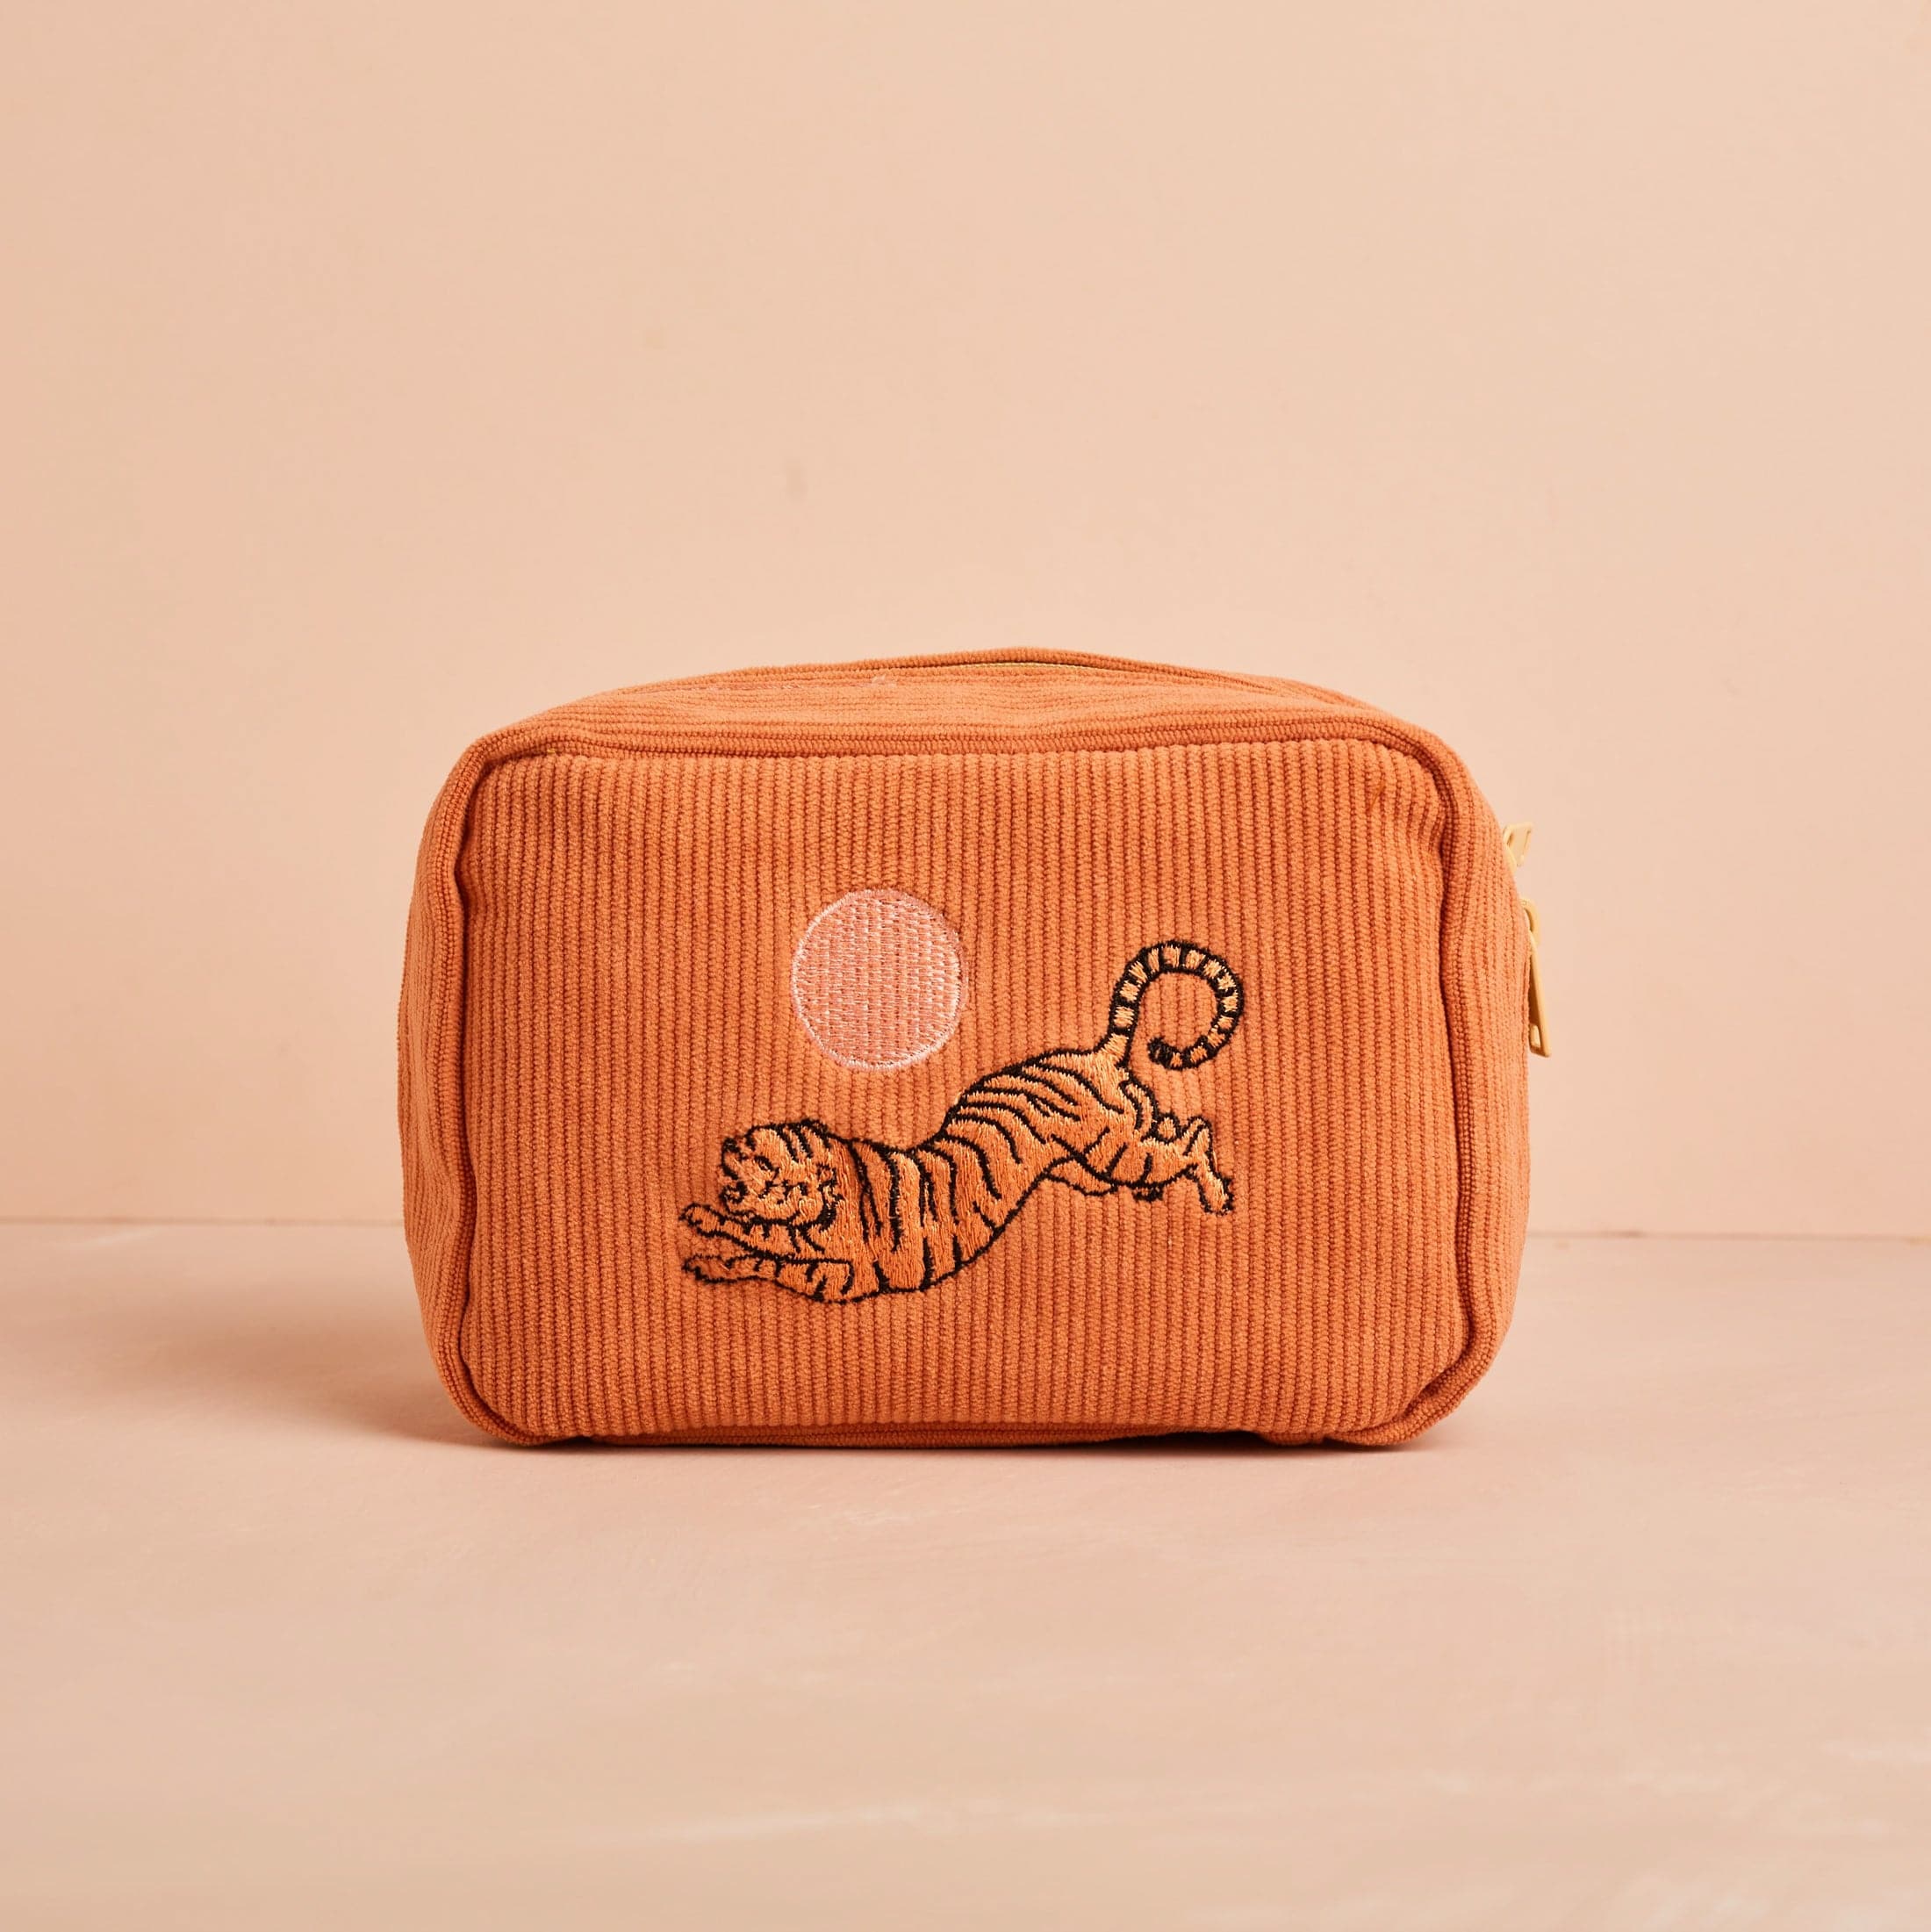 A salmon colored corduroy makeup bag with a tiger design and a pink sun.